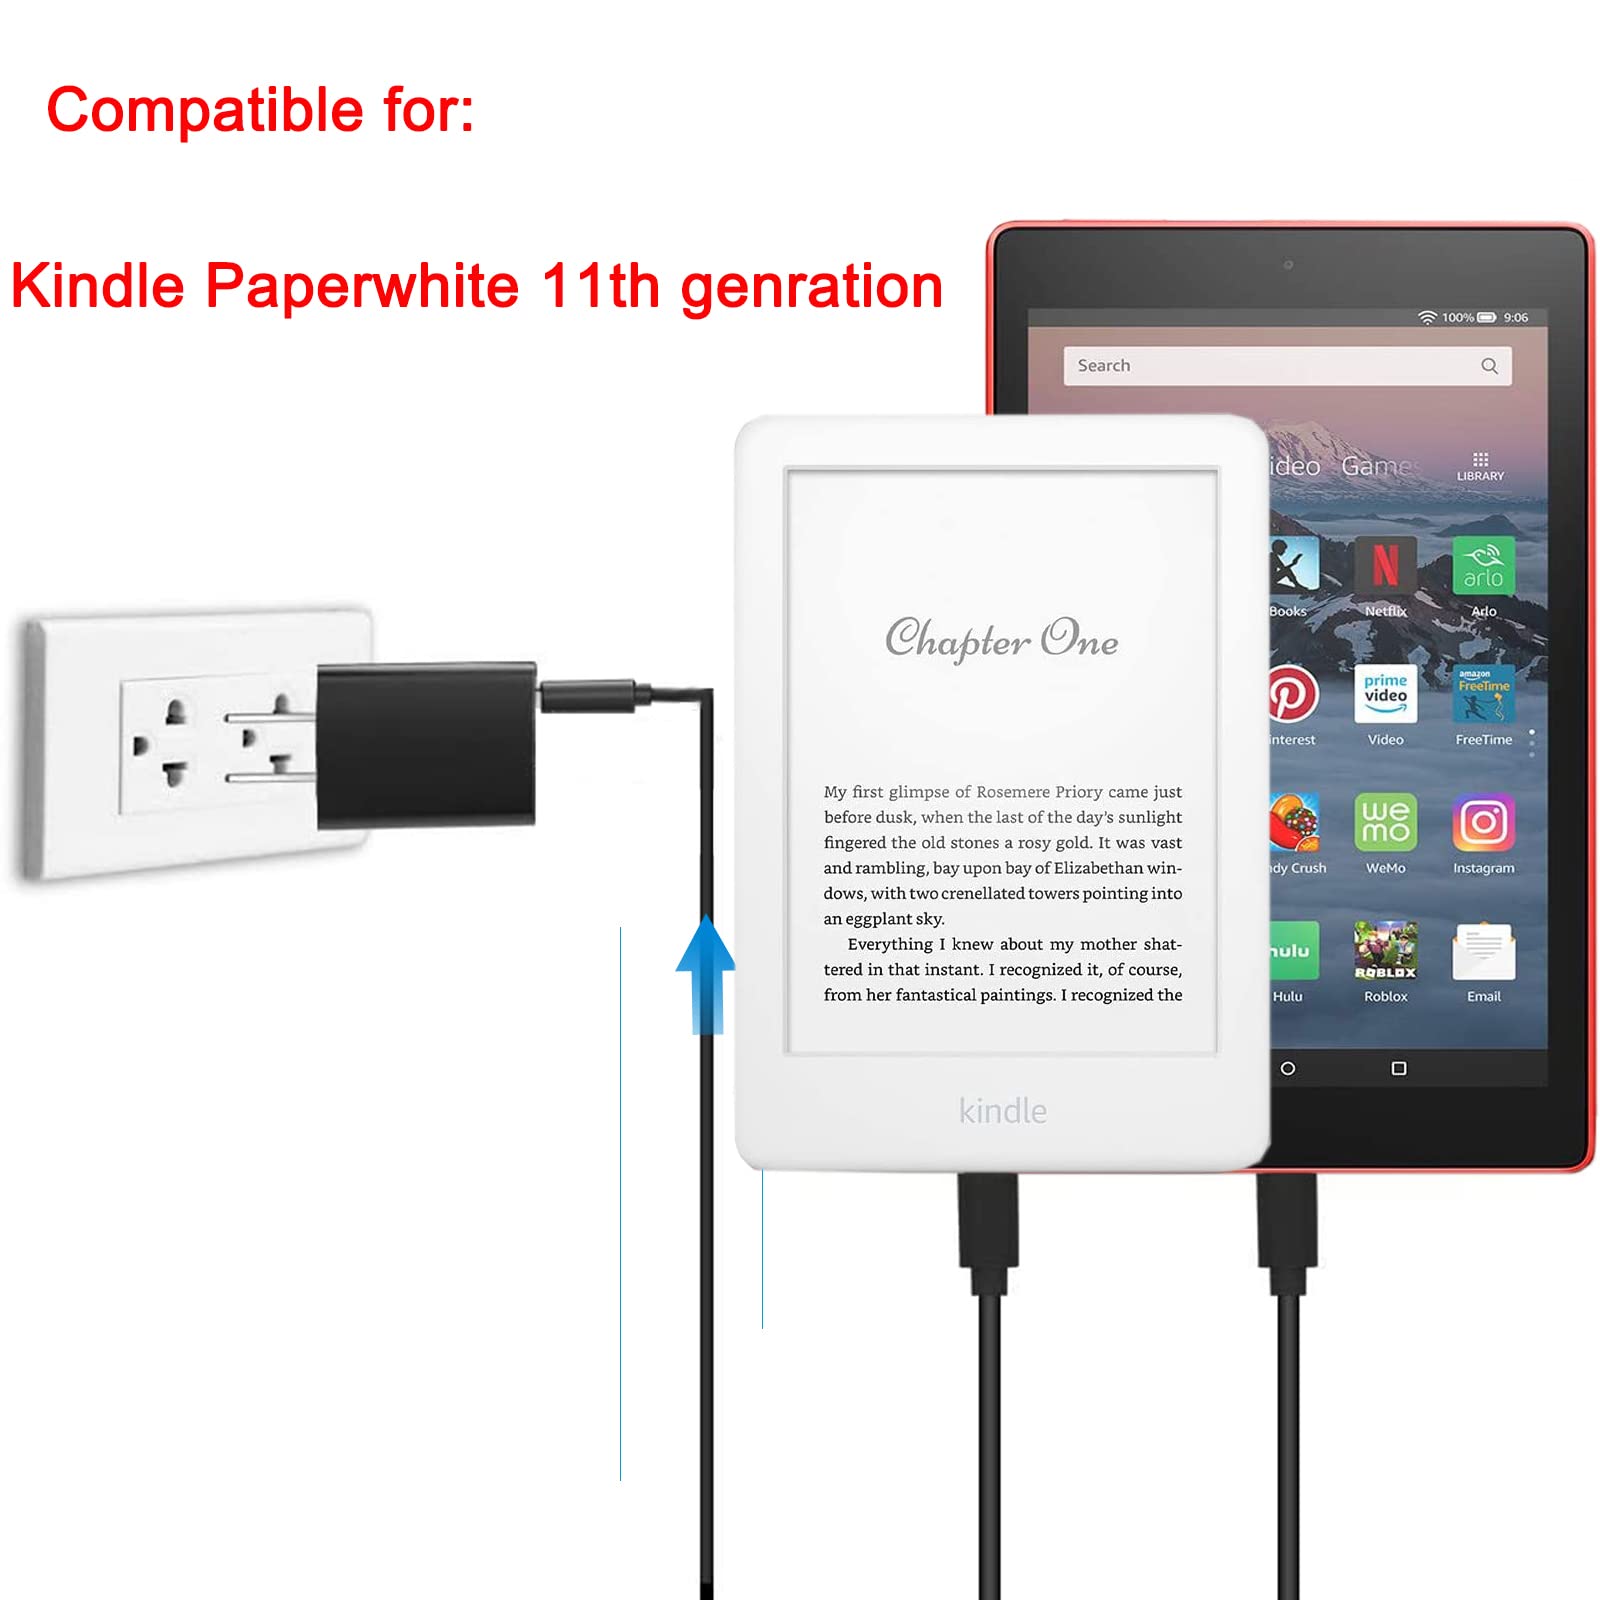 Kindle connected to a laptop via USB cable